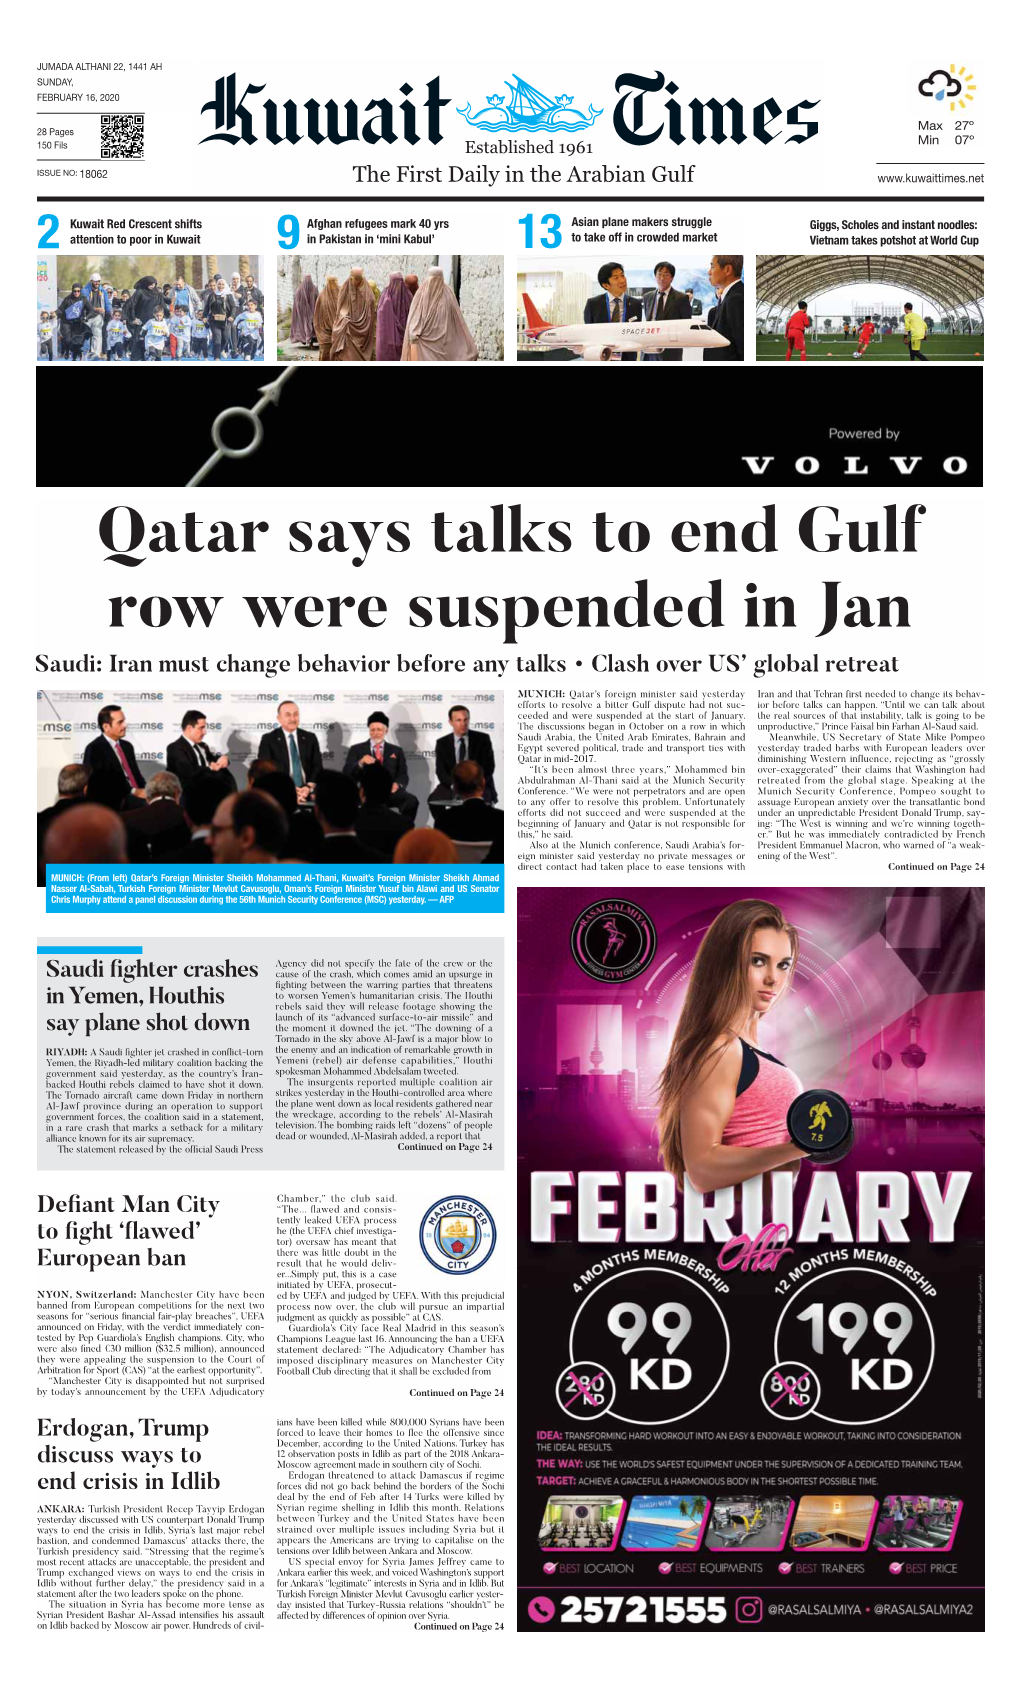 Qatar Says Talks to End Gulf Row Were Suspended in Jan